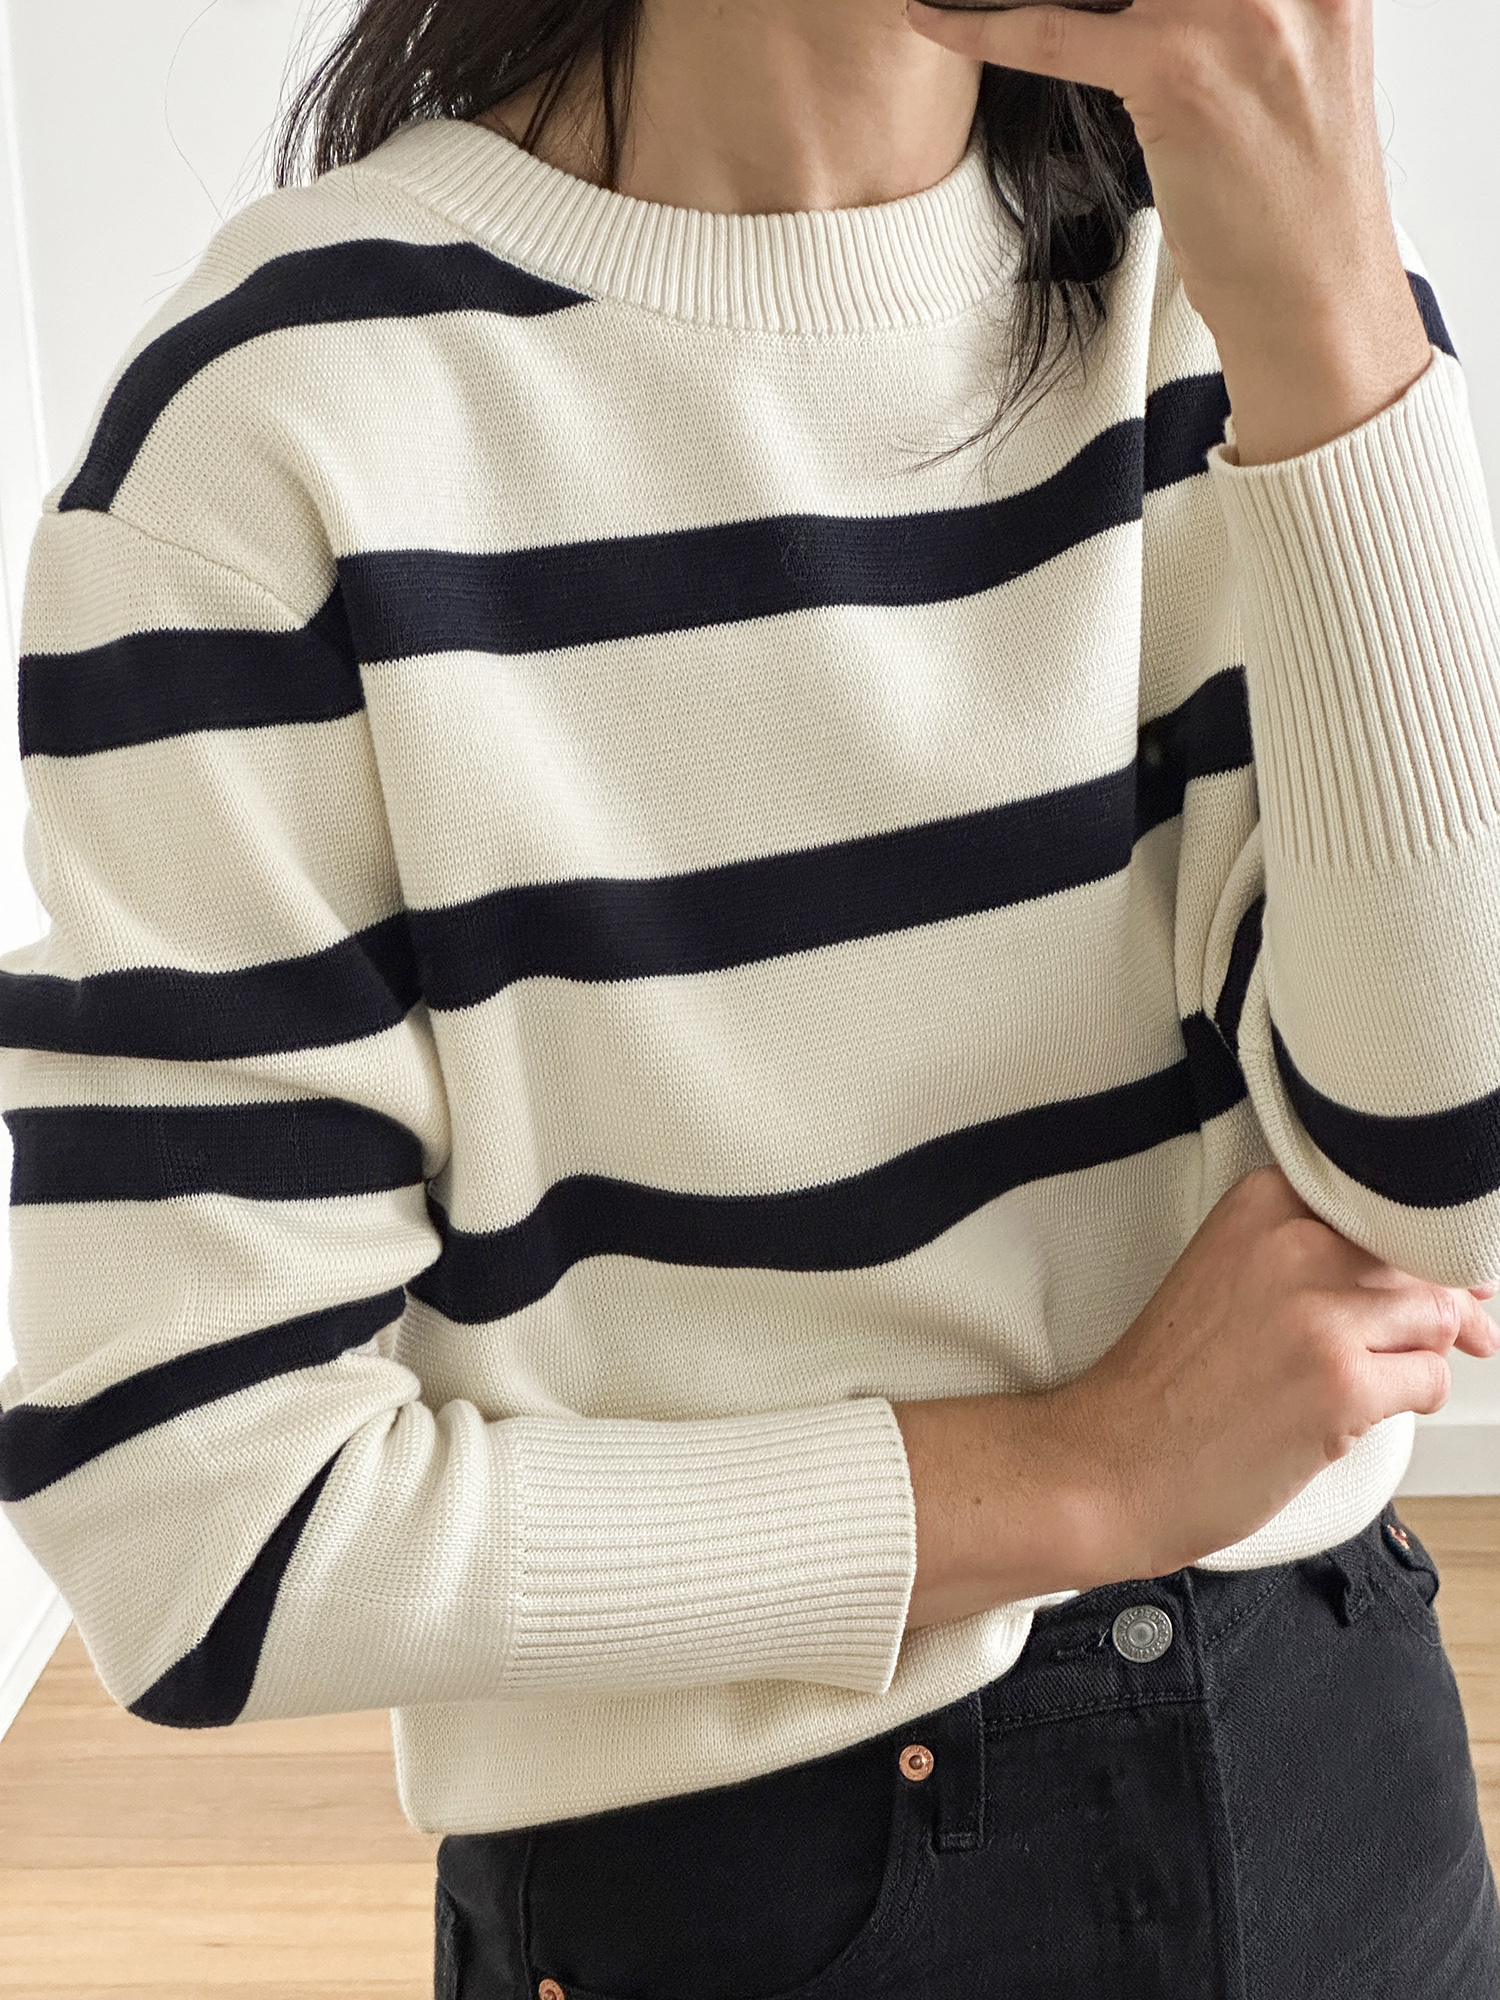 Striped Cotton Sweater Classic Style